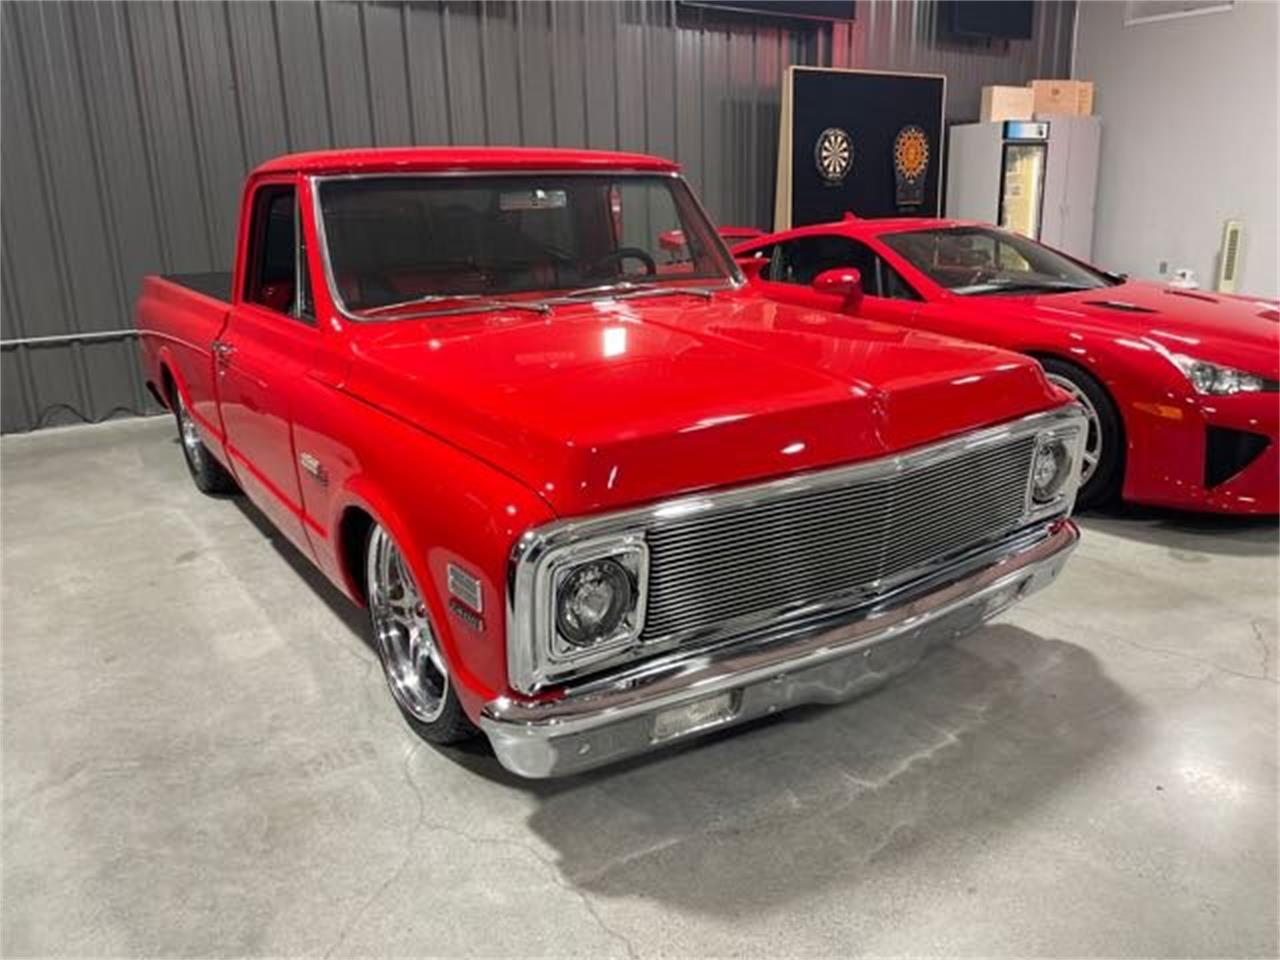 For Sale: 1972 Chevrolet C/K 10 in Knoxville, Tennessee for sale in Knoxville, TN